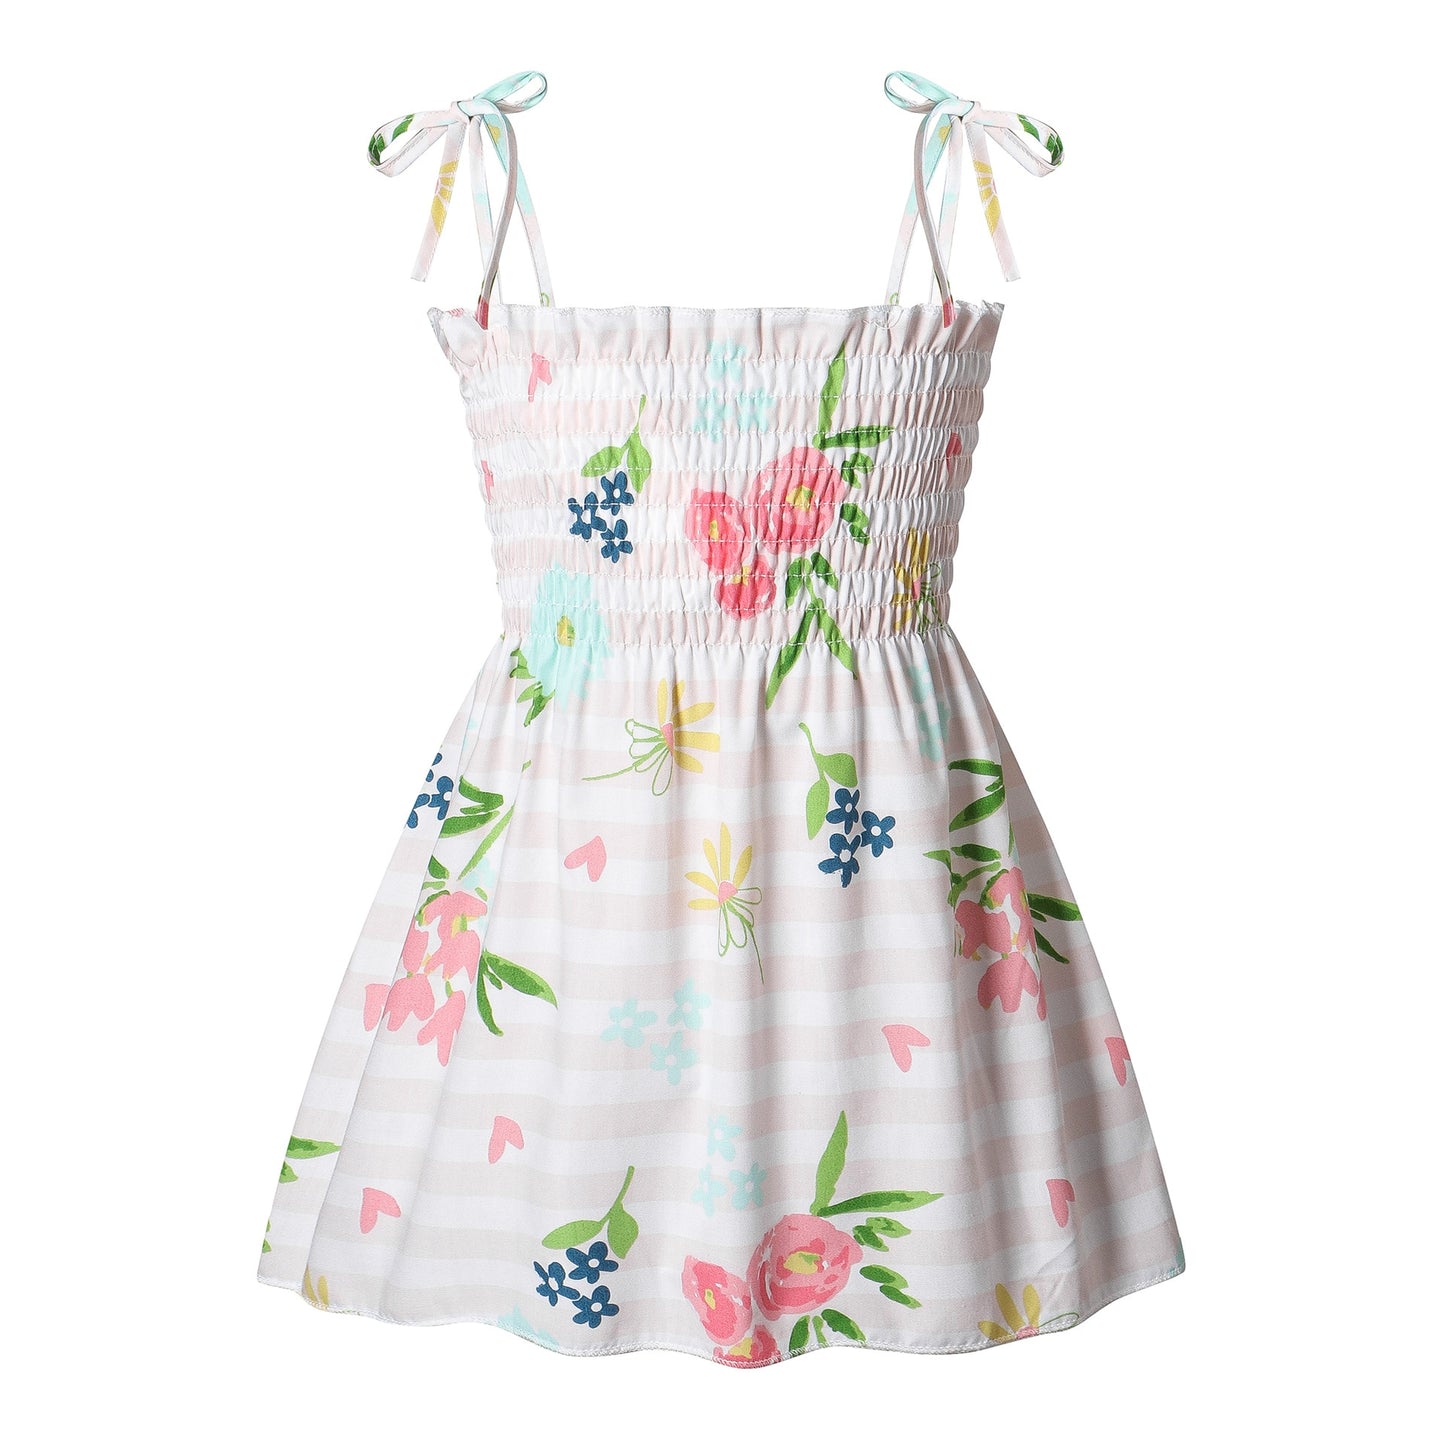 Gisela Splicing Summer Dresses child Outfits Beach Clothes - GuGuTon